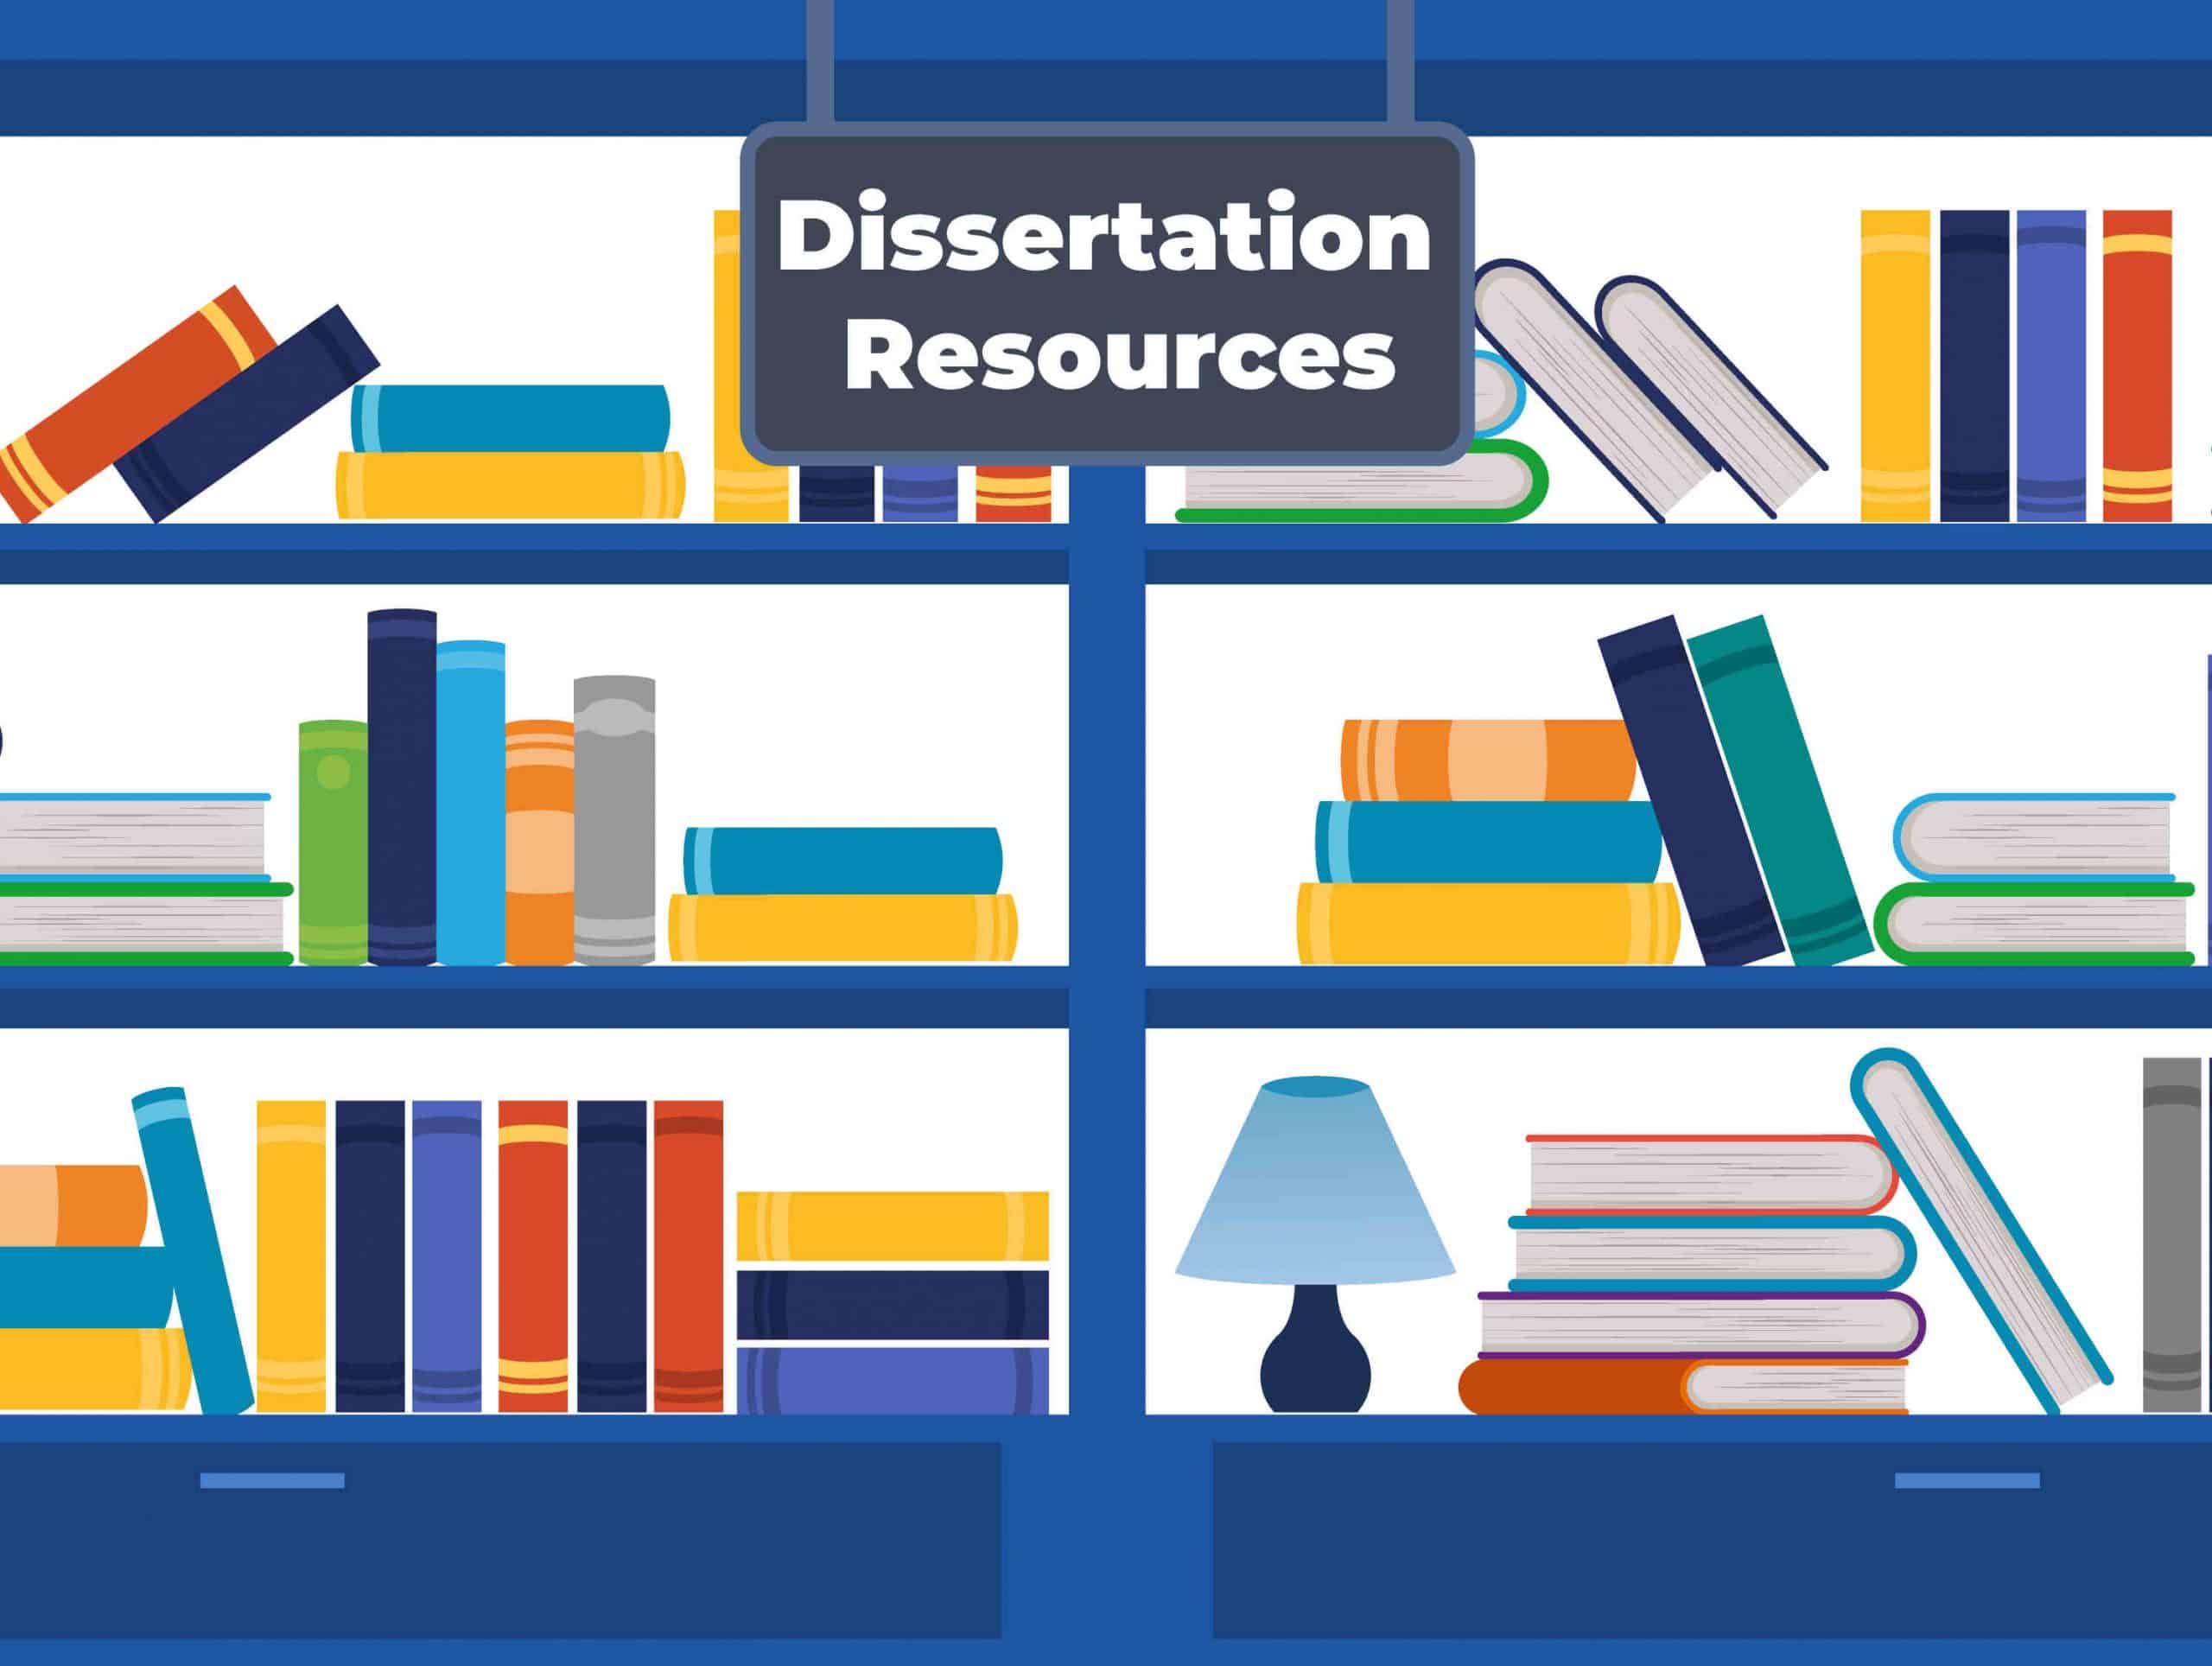 Bookshelf with sign that says Dissertation Resources, to demonstrate help with dissertation research